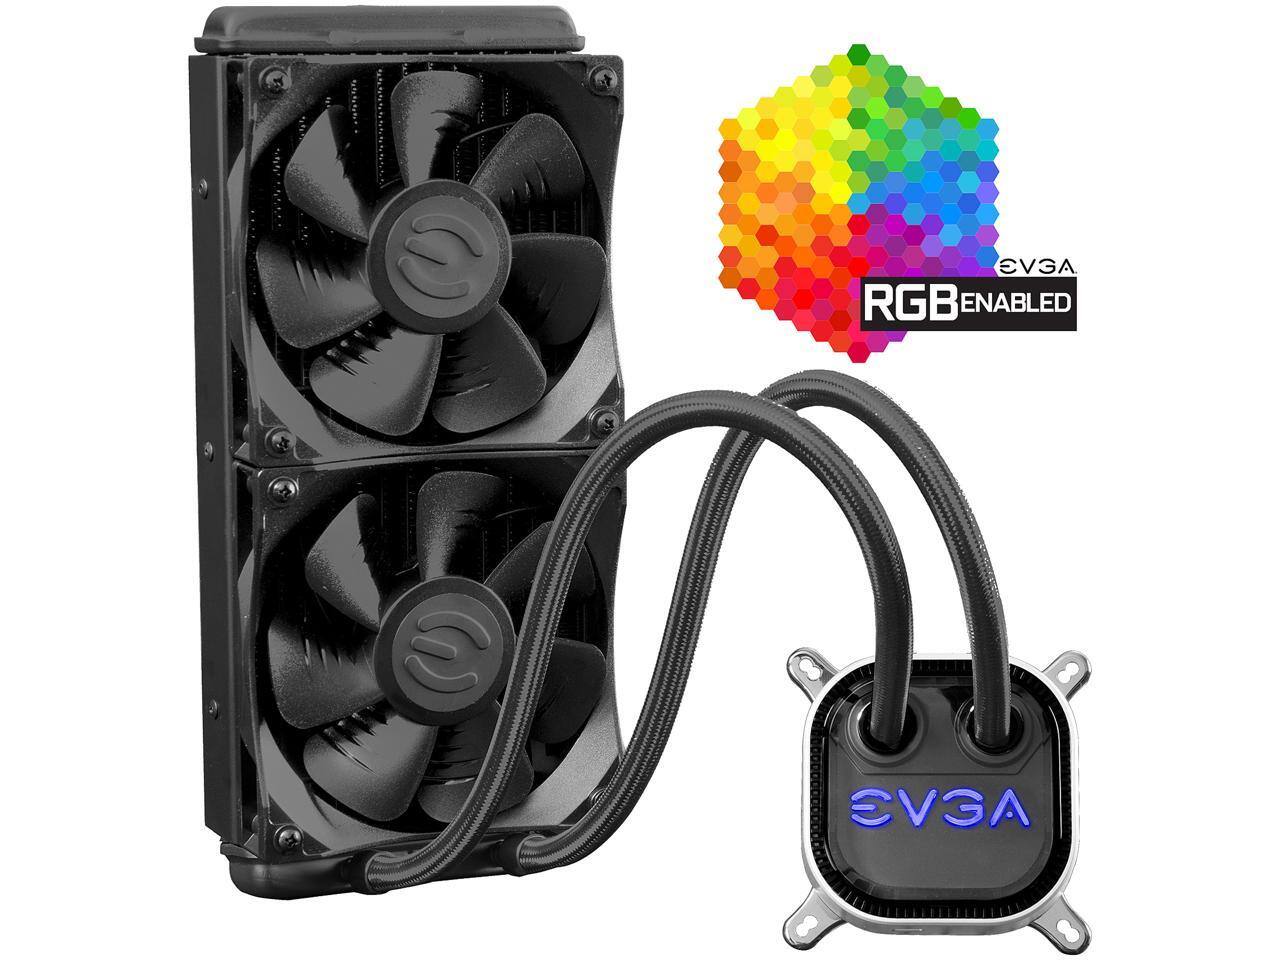 EVGA CLC 240mm All-In-One RGB LED CPU Liquid Cooler for $69.99 w/ FS